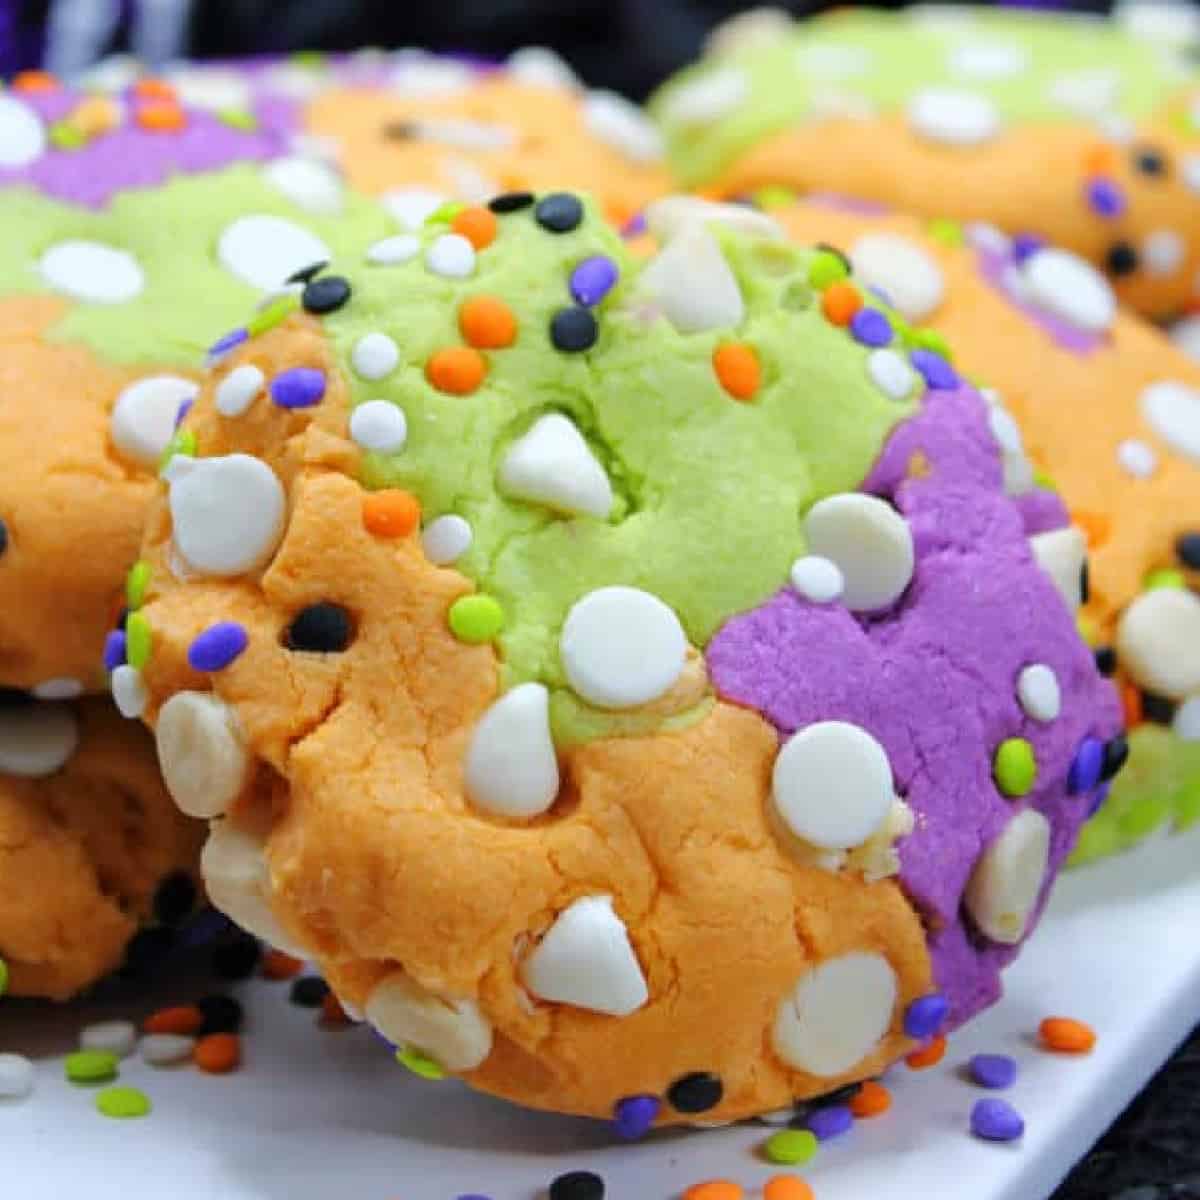 Halloween cookies with sprinkles on a white plate as the featured image of hocus pocus party food ideas.